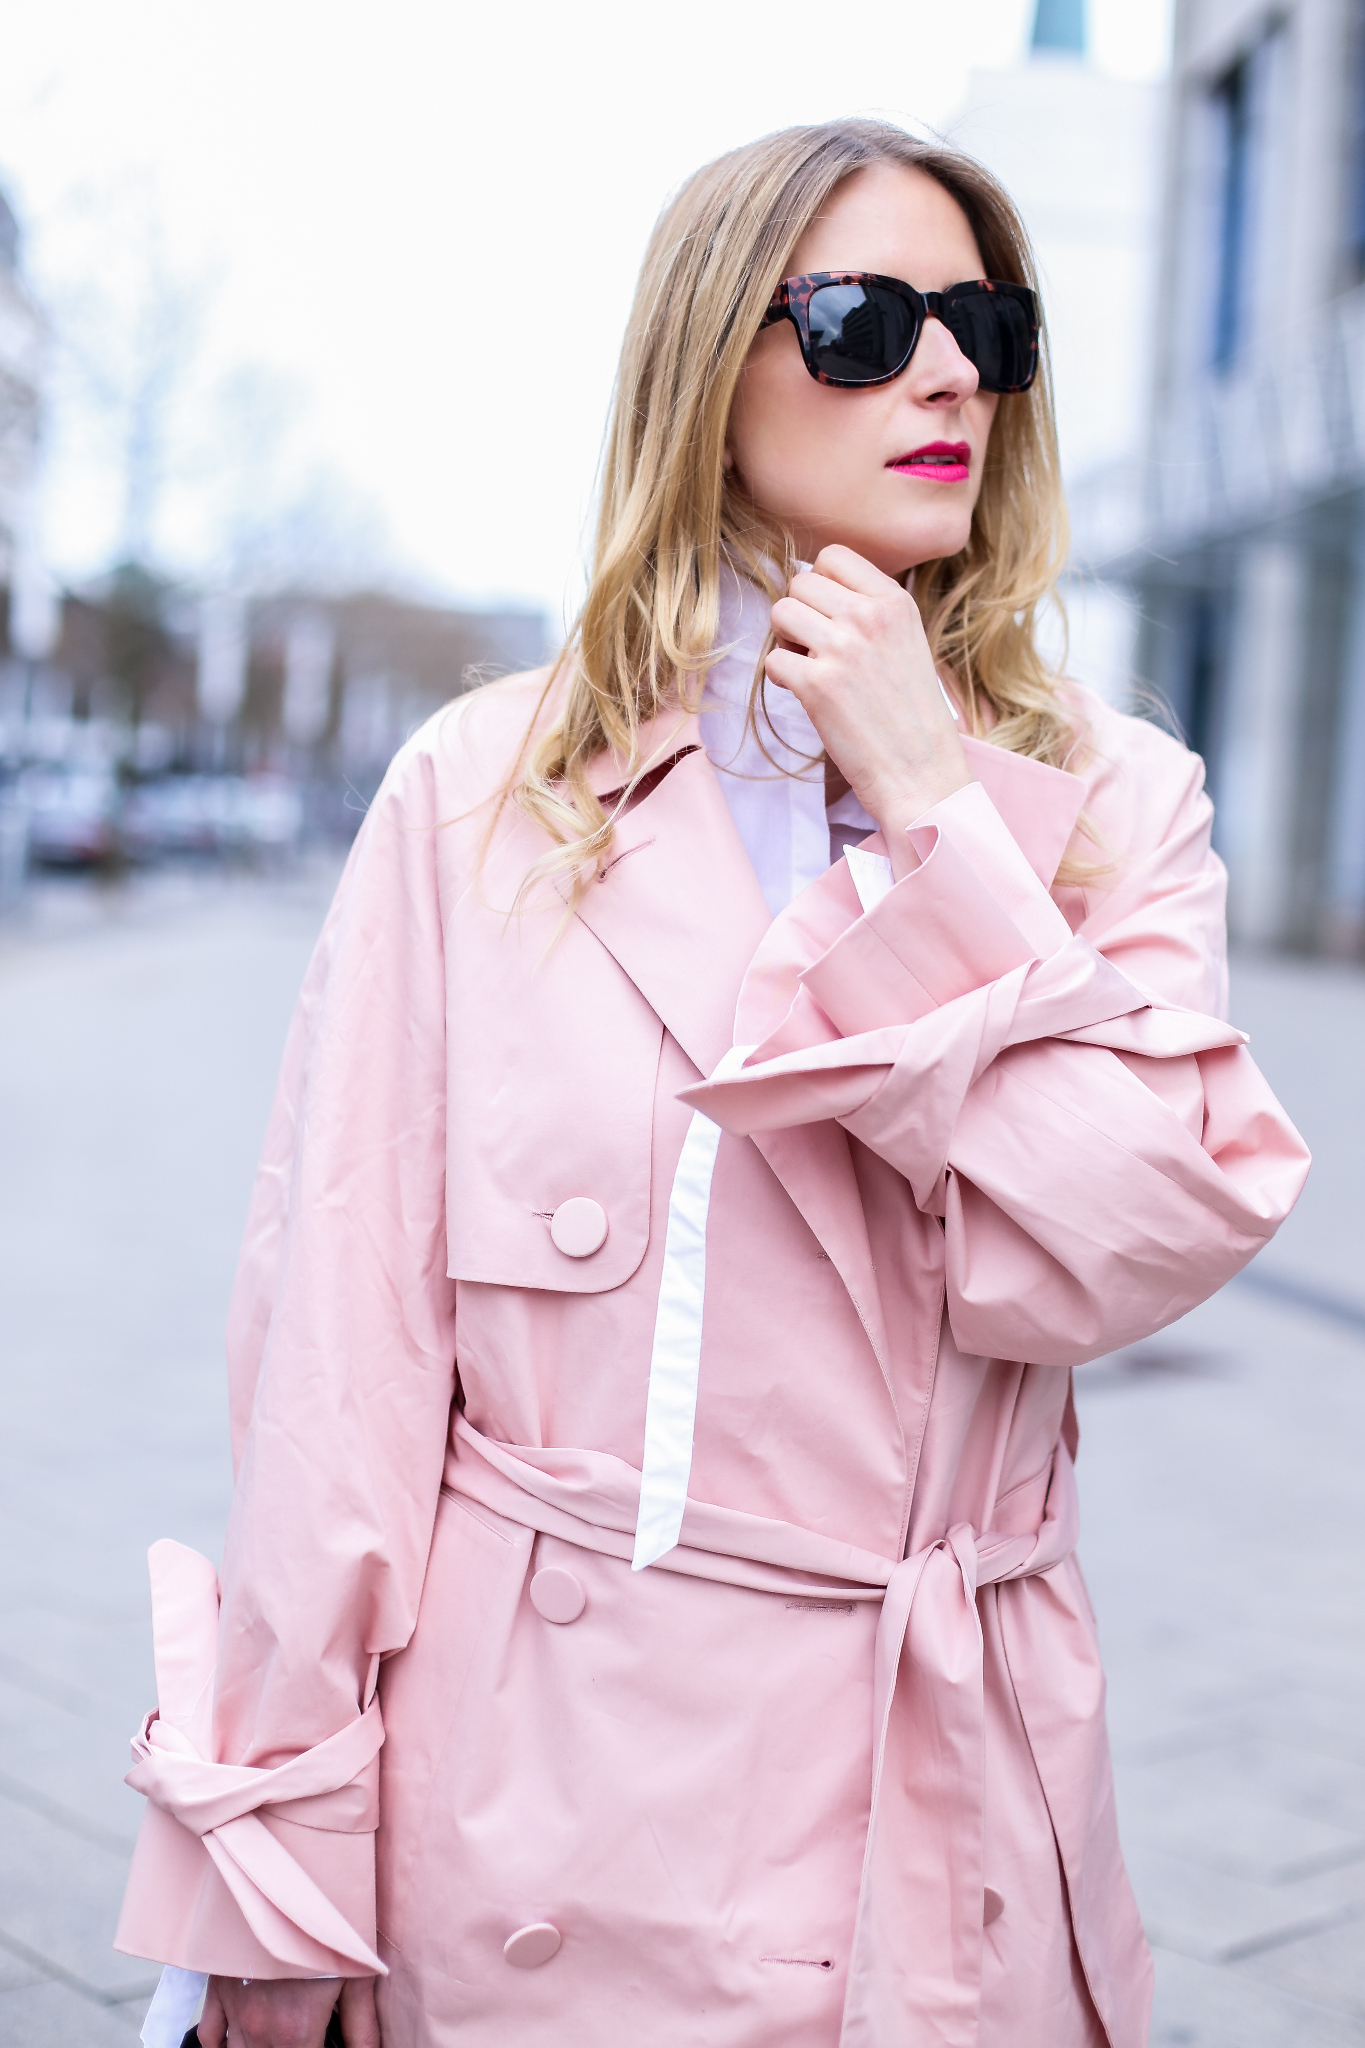 MOD-by-Monique-Fashion-Looks-Pink-and-bows-7